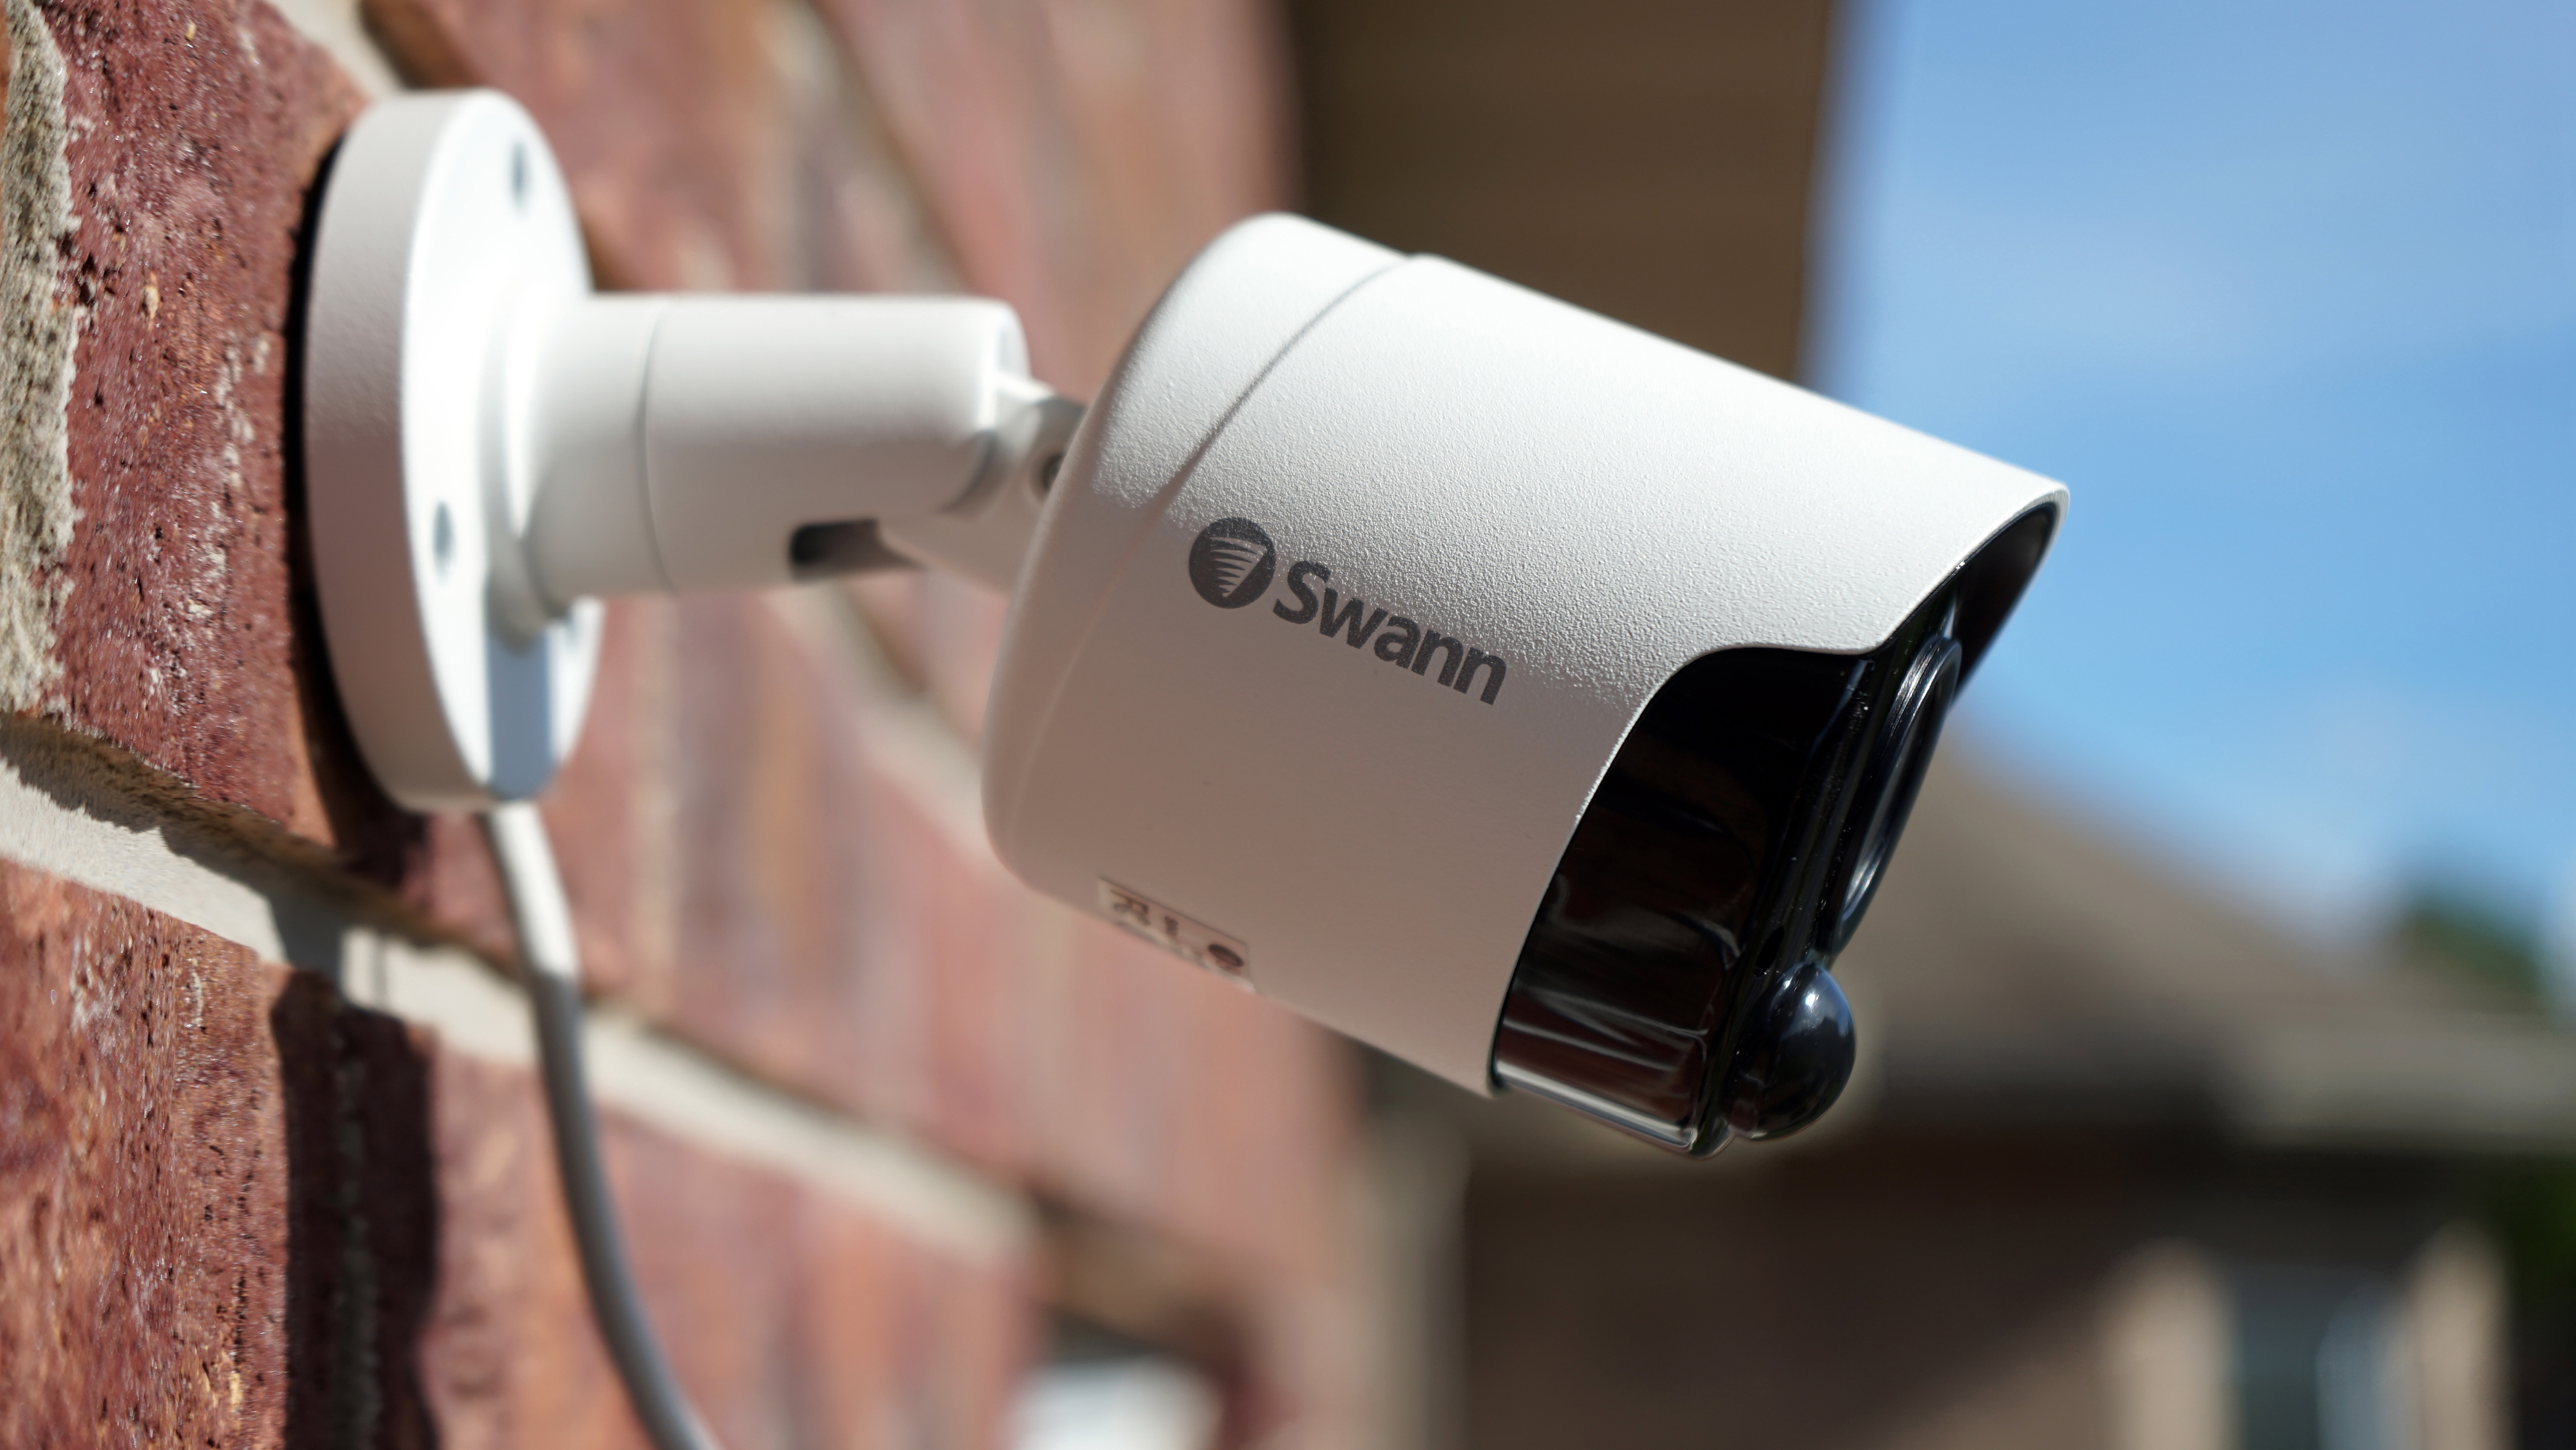 Swann 4K Ultra HD NVR Security System Review | Digital Trends